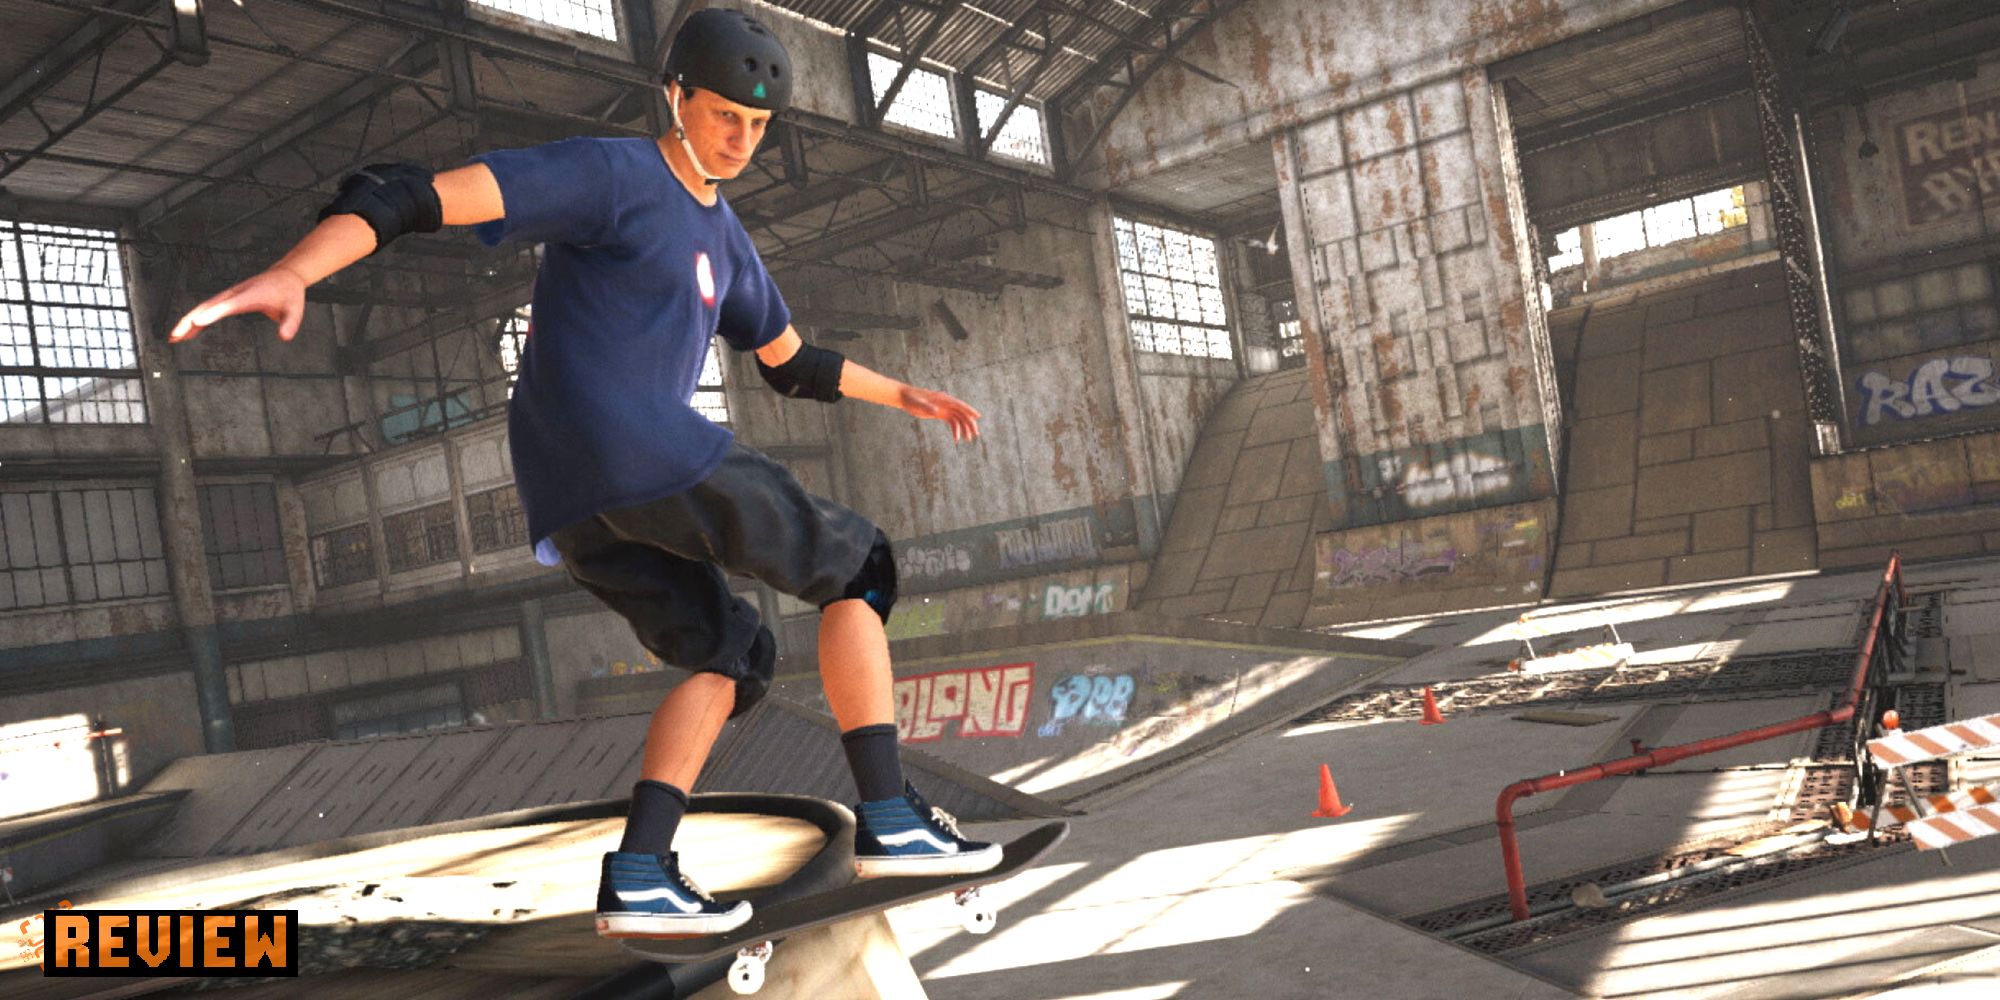 Tony Hawk's Pro Skater 2 - PC Review and Full Download